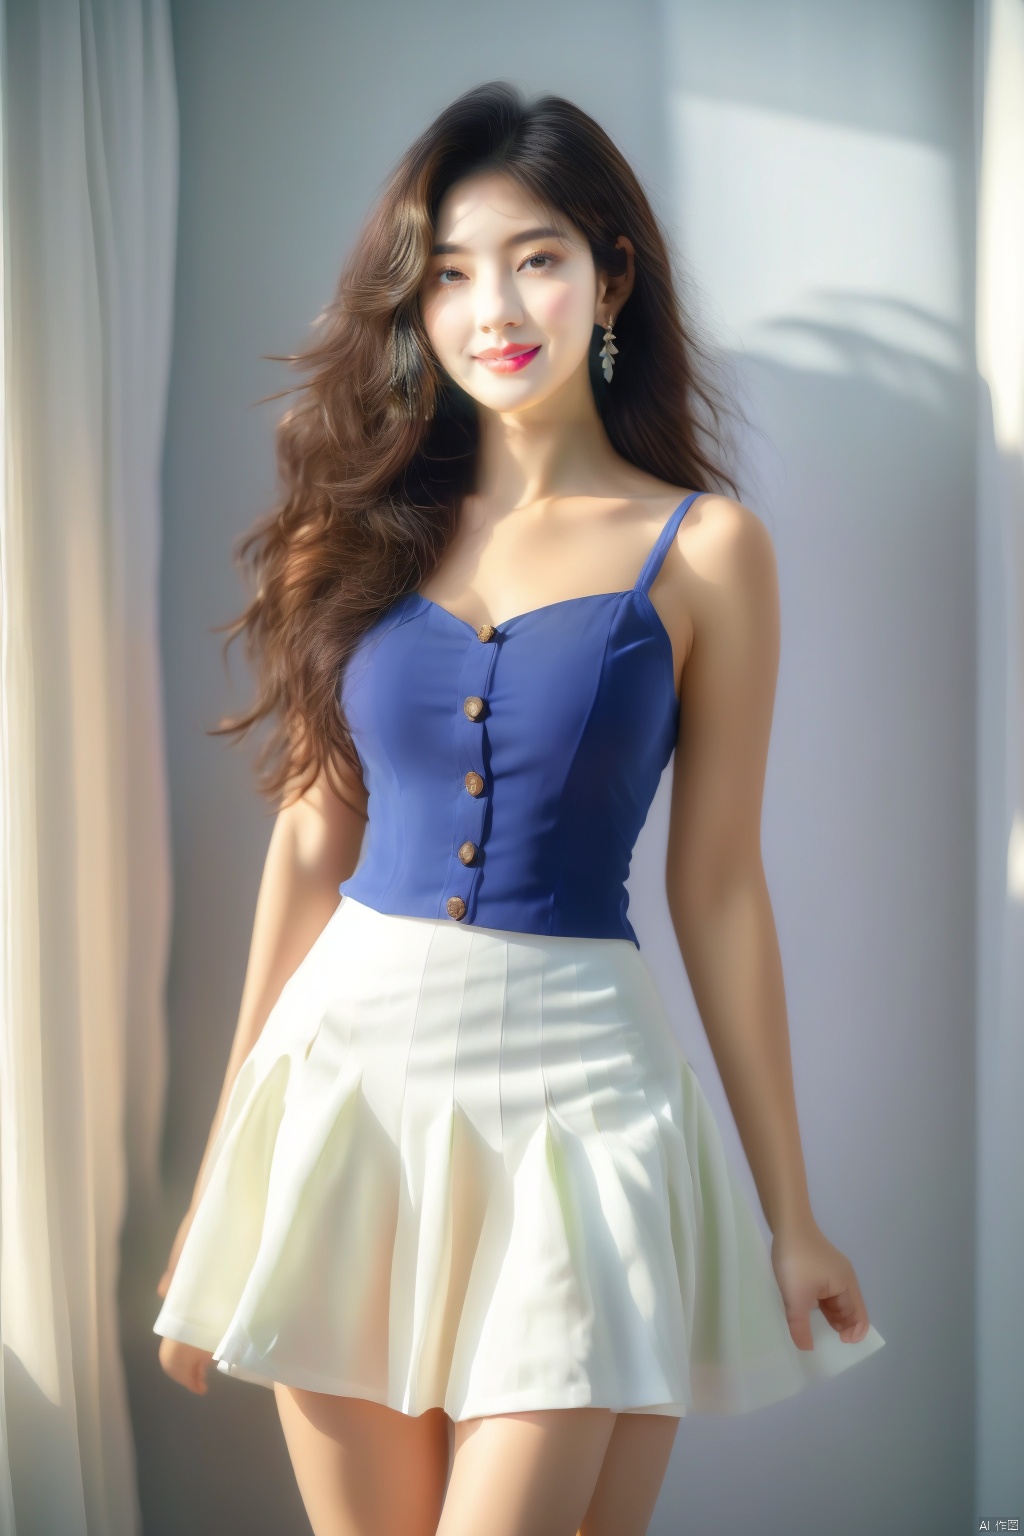  Surrealist beauty portraits, wearing royal blue exquisite jewelry earrings, low cut, white short skirt, half body, hands behind, naughty, smiling, white jk clothes, standing in the flowers, colorful flowers, white tones, facing forward, seductive posture, sunshine, elegant long hair, black hair, air bangs, super clear, 8k.